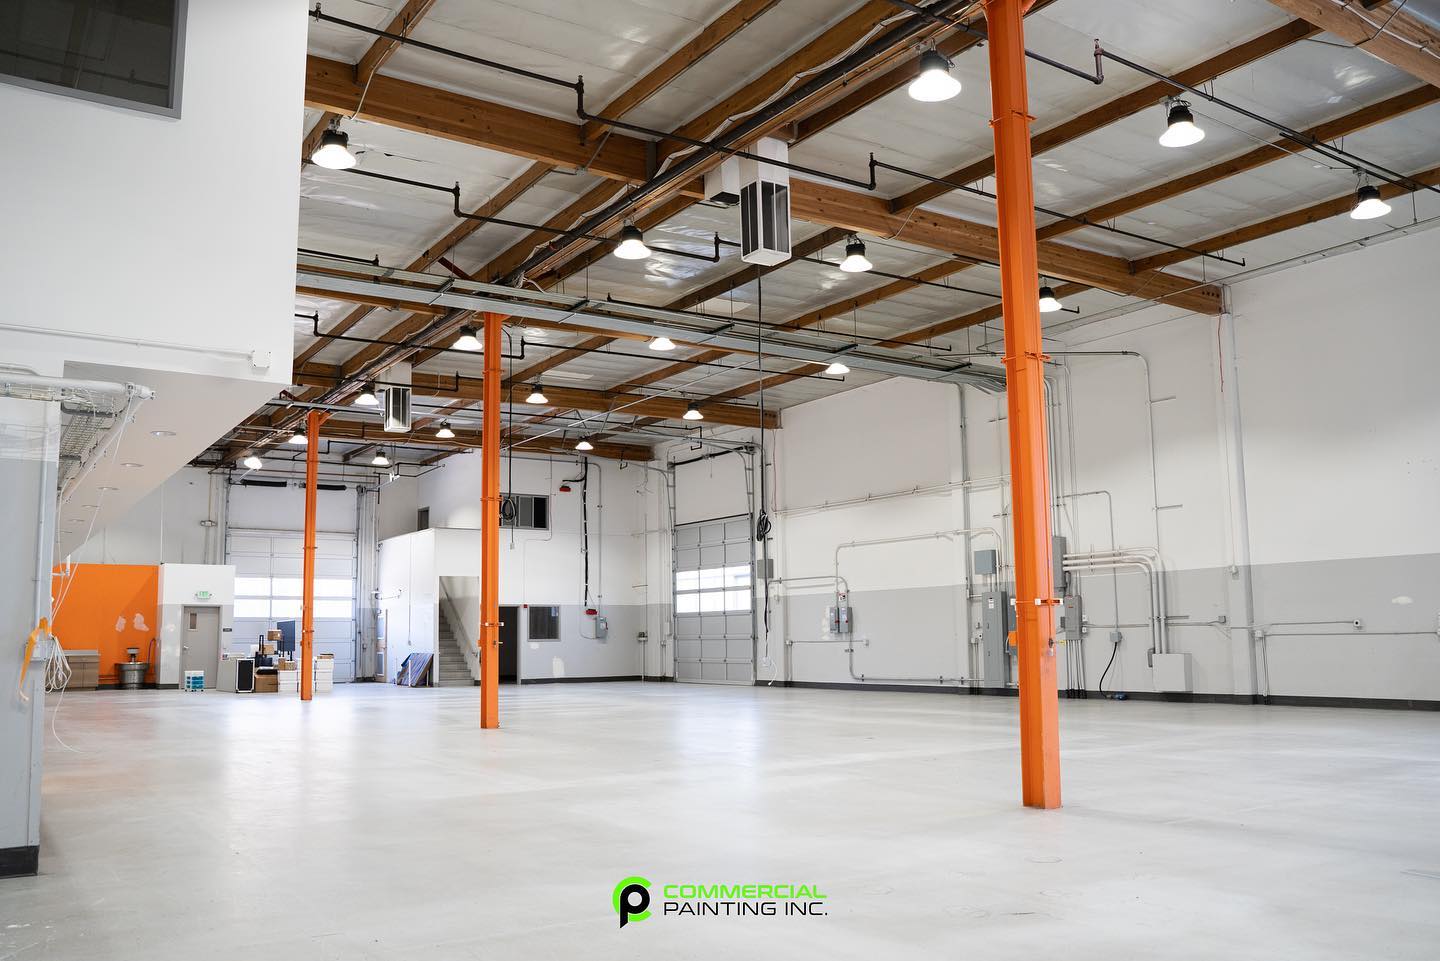 Commercial Painting Services for Commercial and Industrial Interior Painting